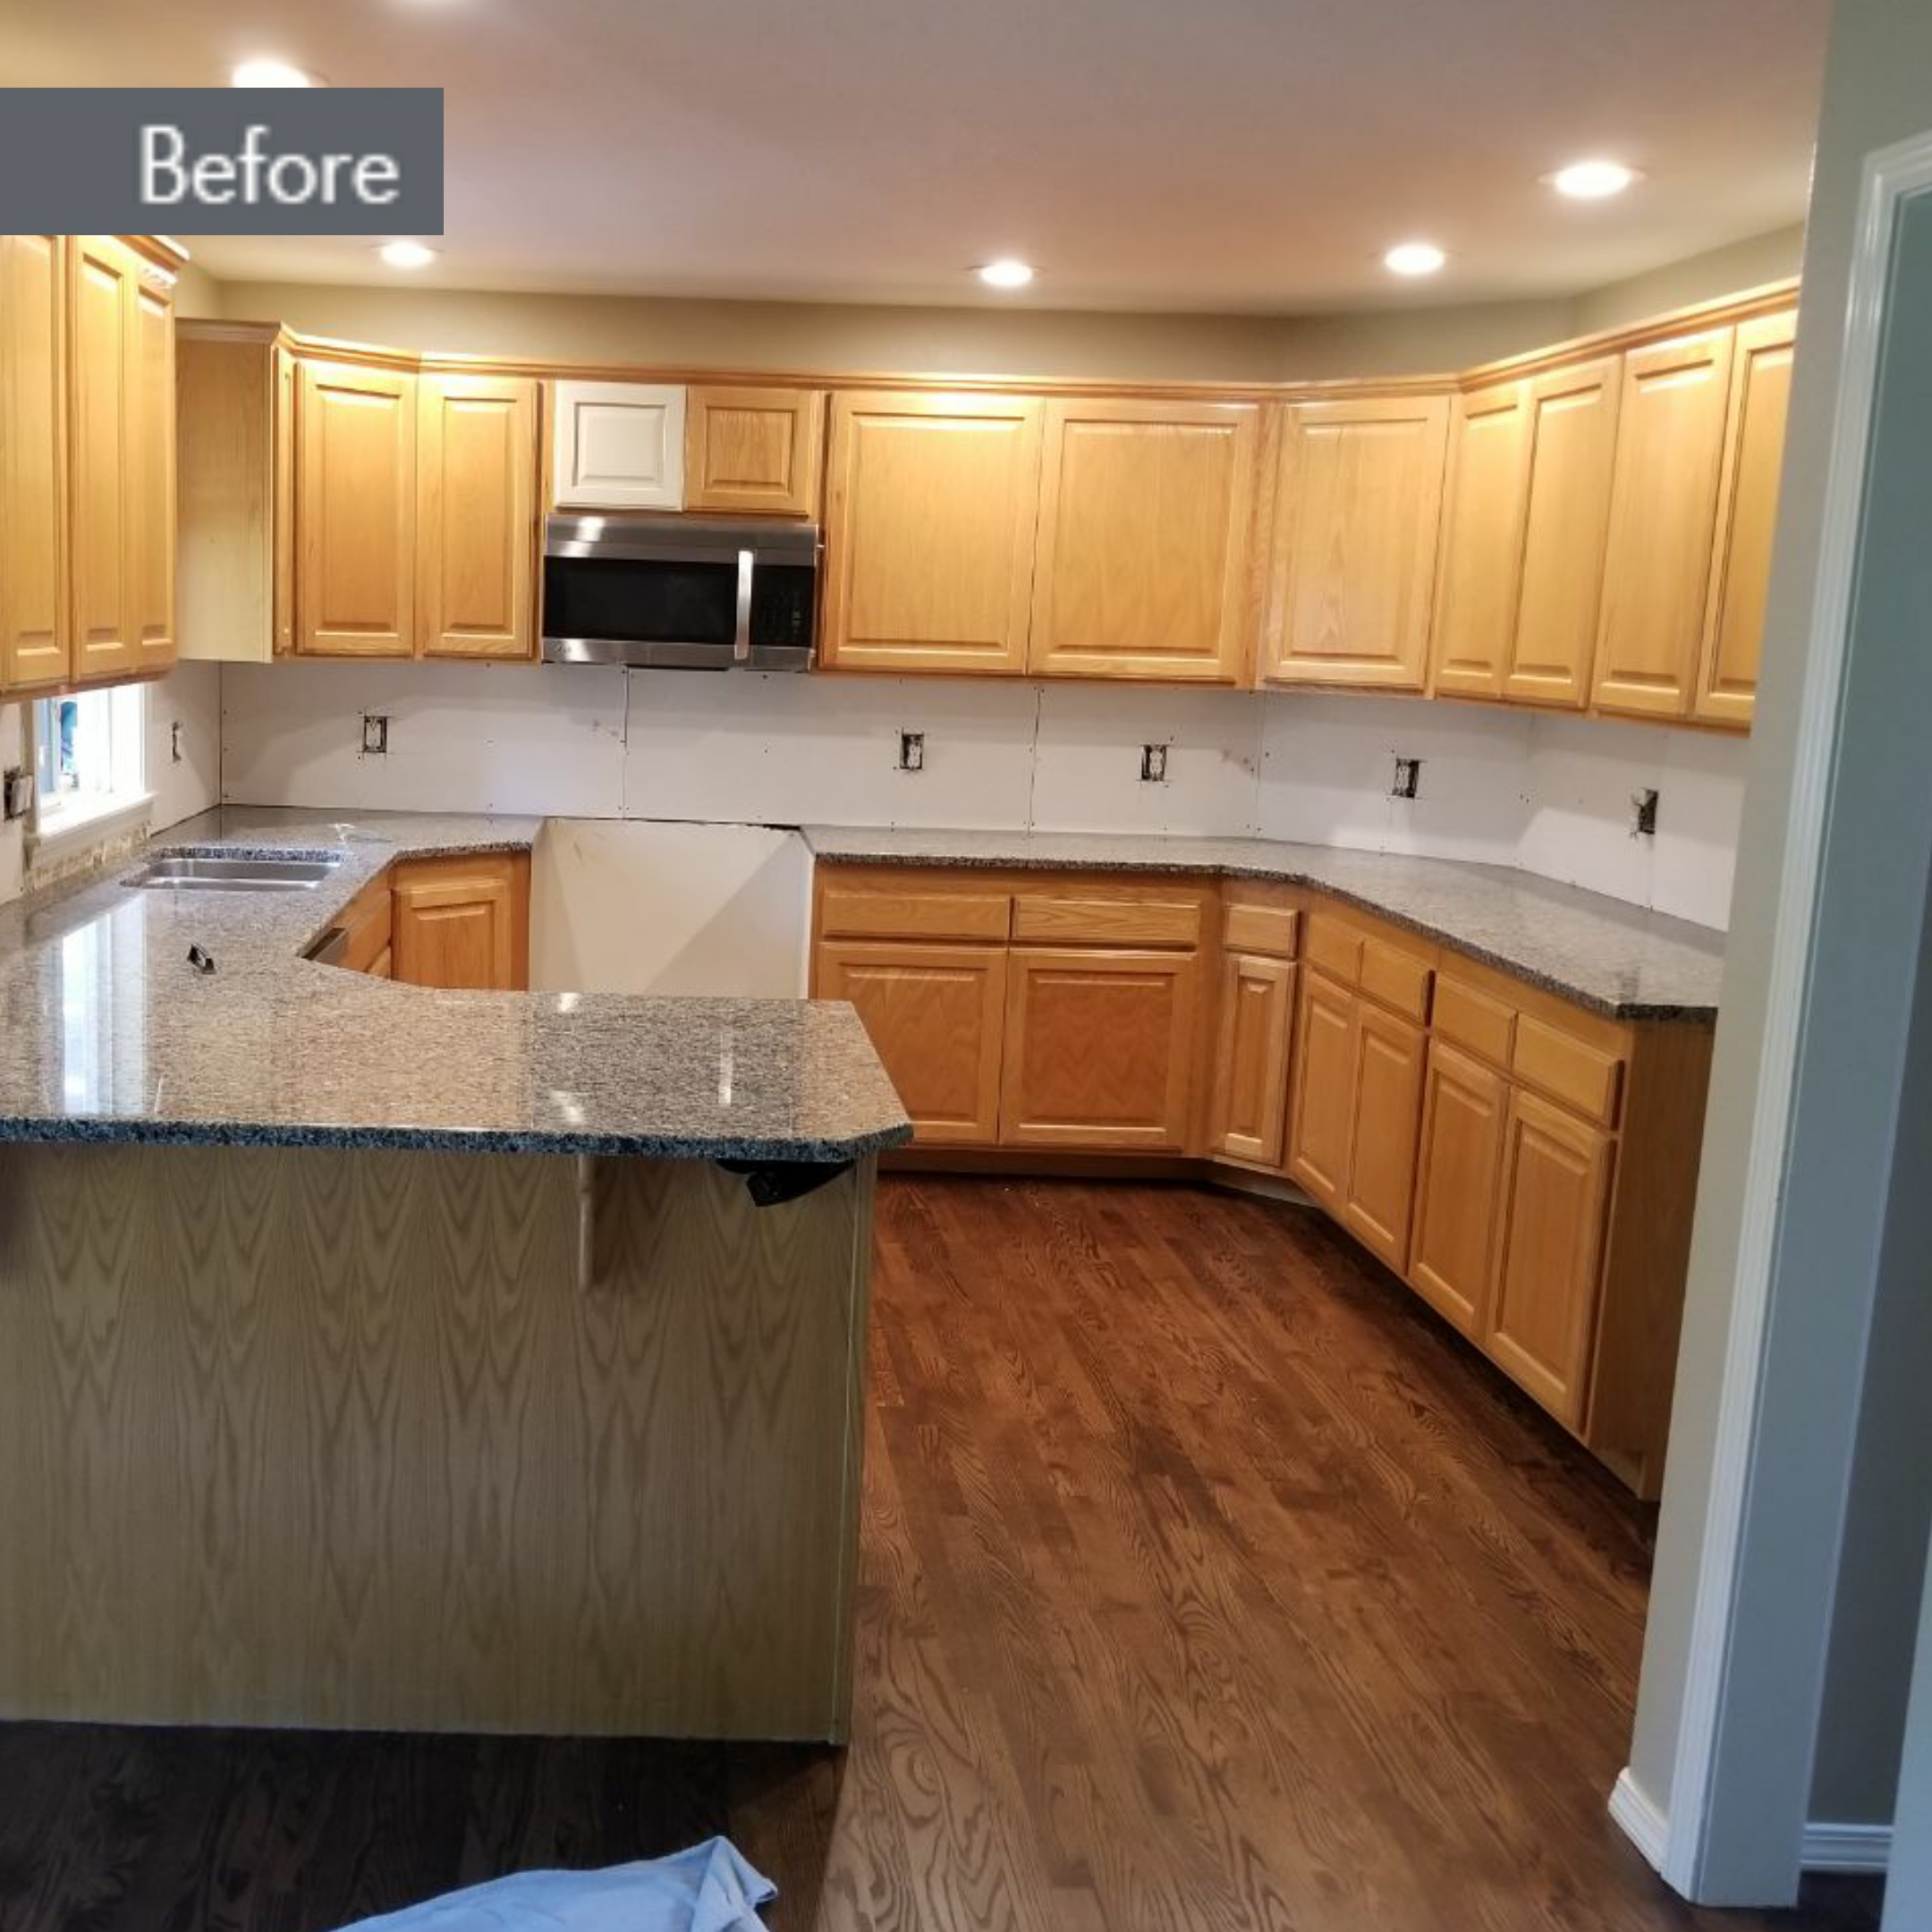 Before-Before and after of a cabinet door and hardware replacement in a Boise kitchen 